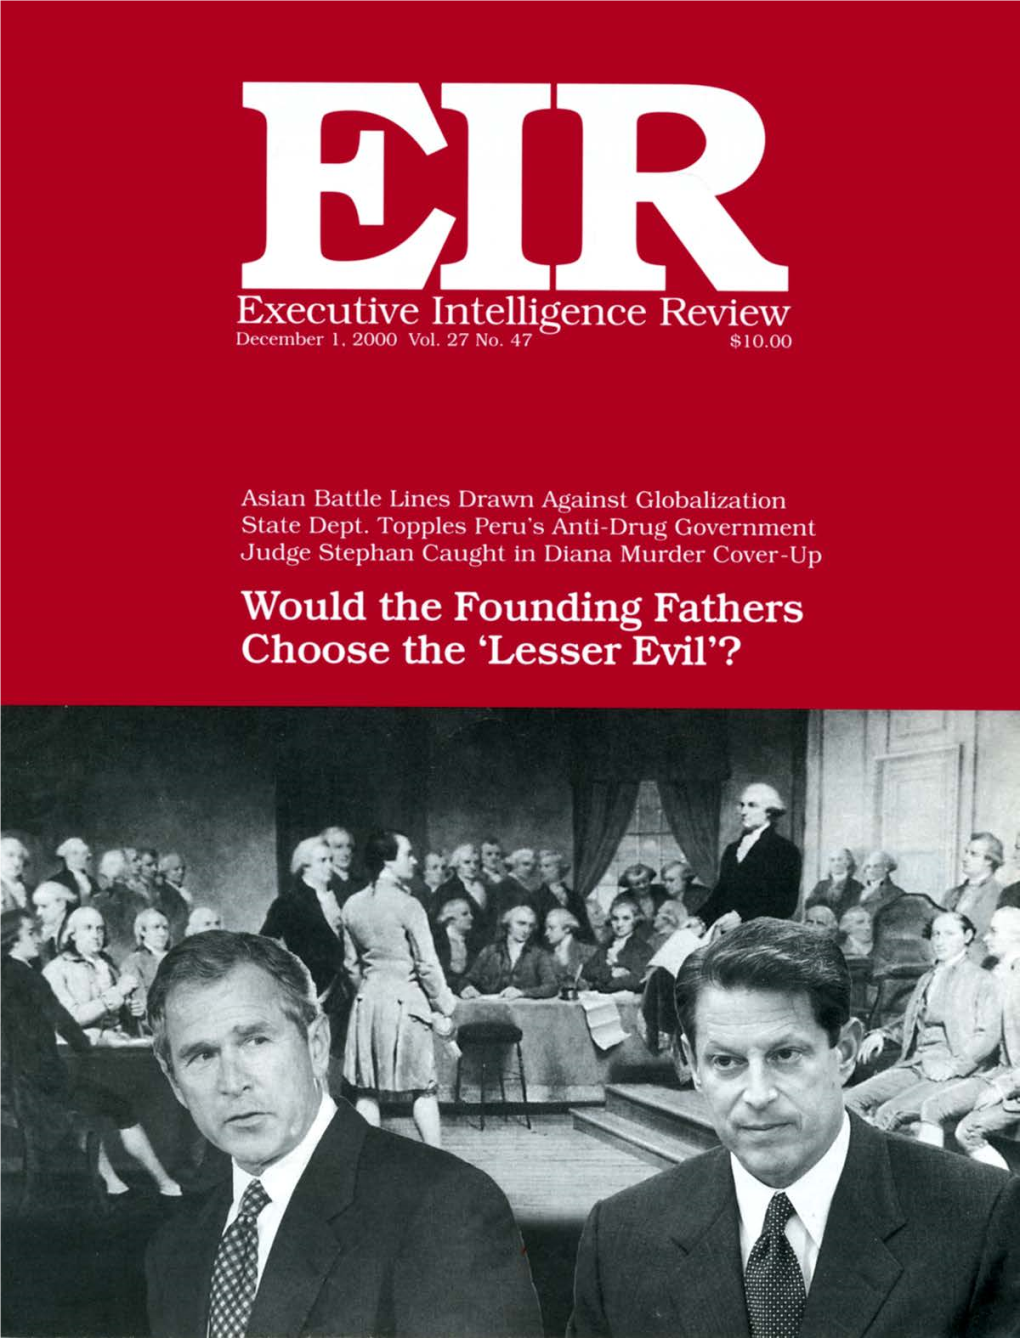 Executive Intelligence Review, Volume 27, Number 47, December